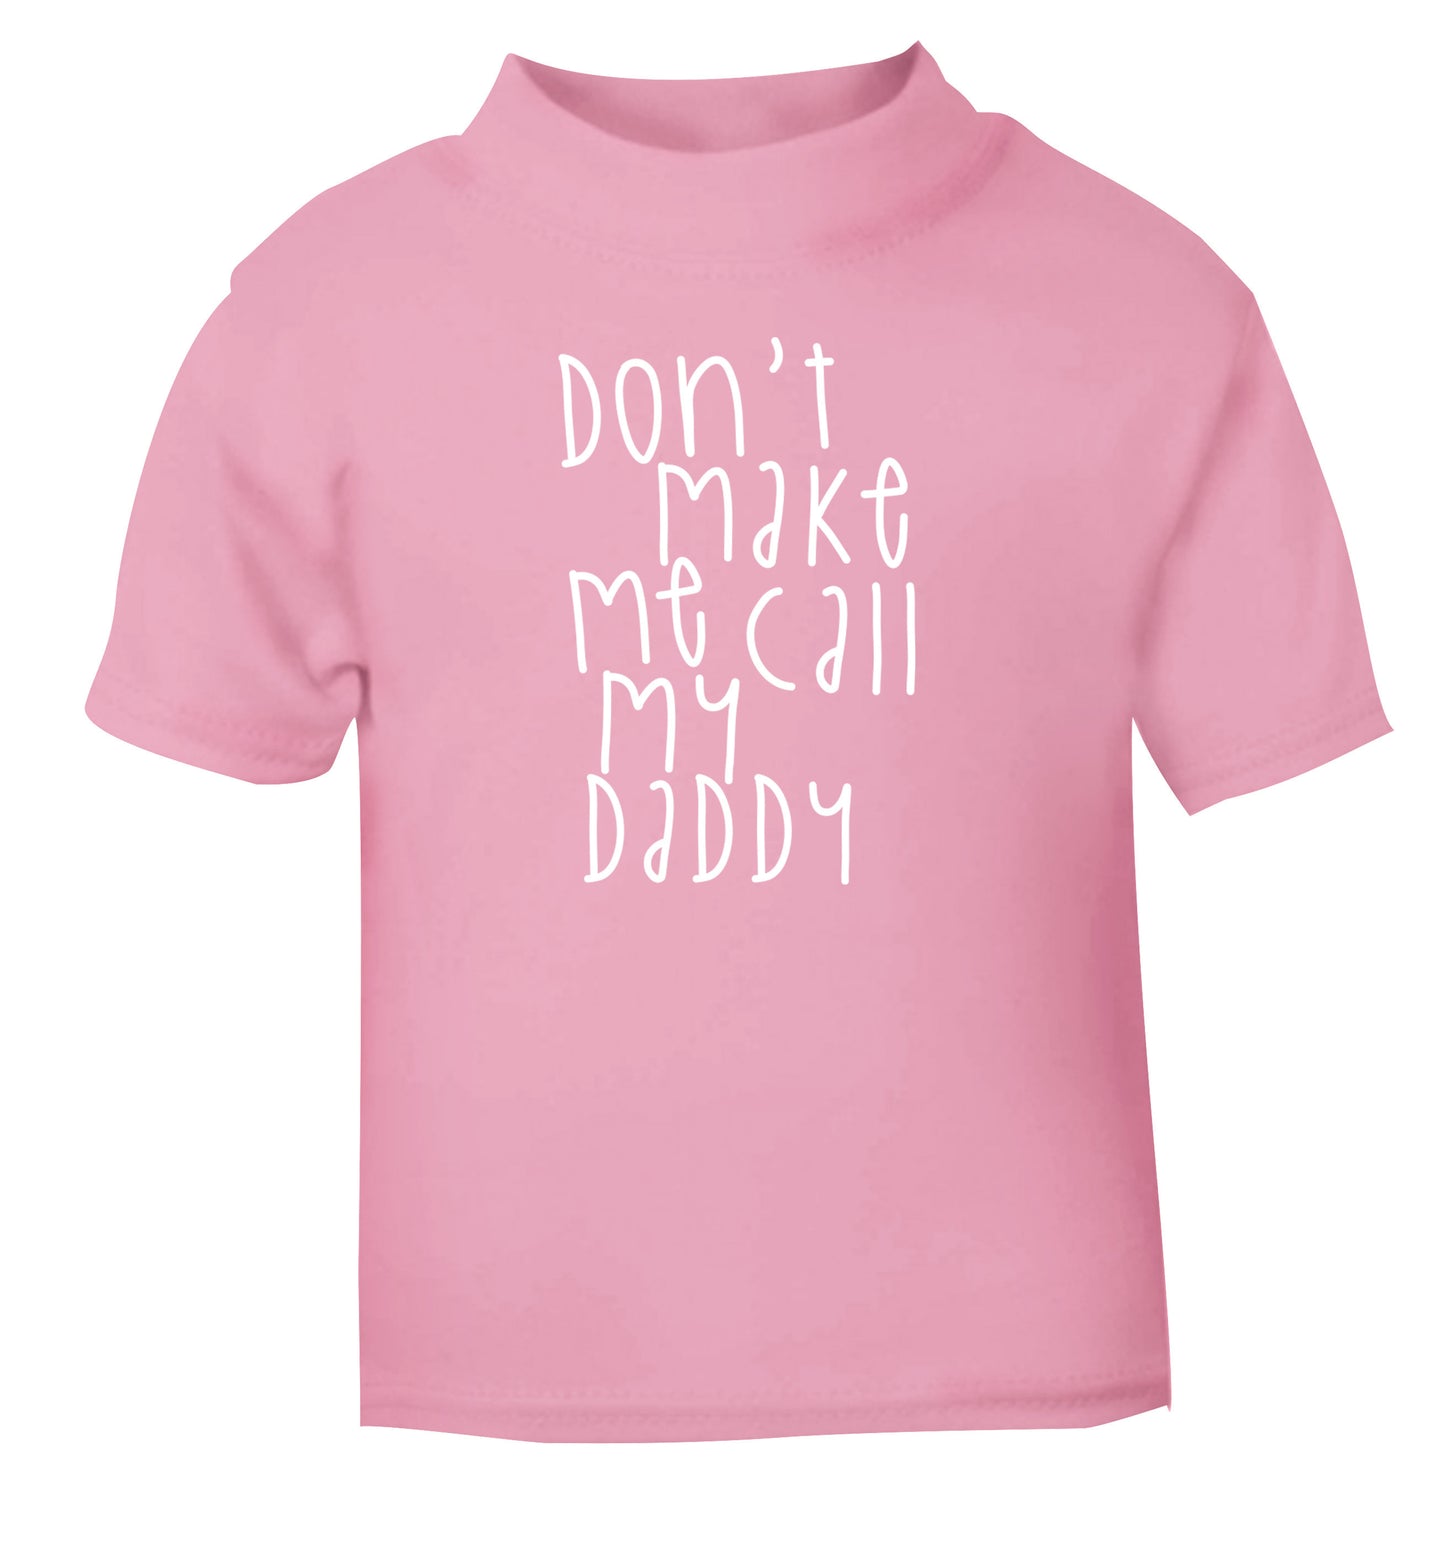 Don't make me call my daddy light pink Baby Toddler Tshirt 2 Years